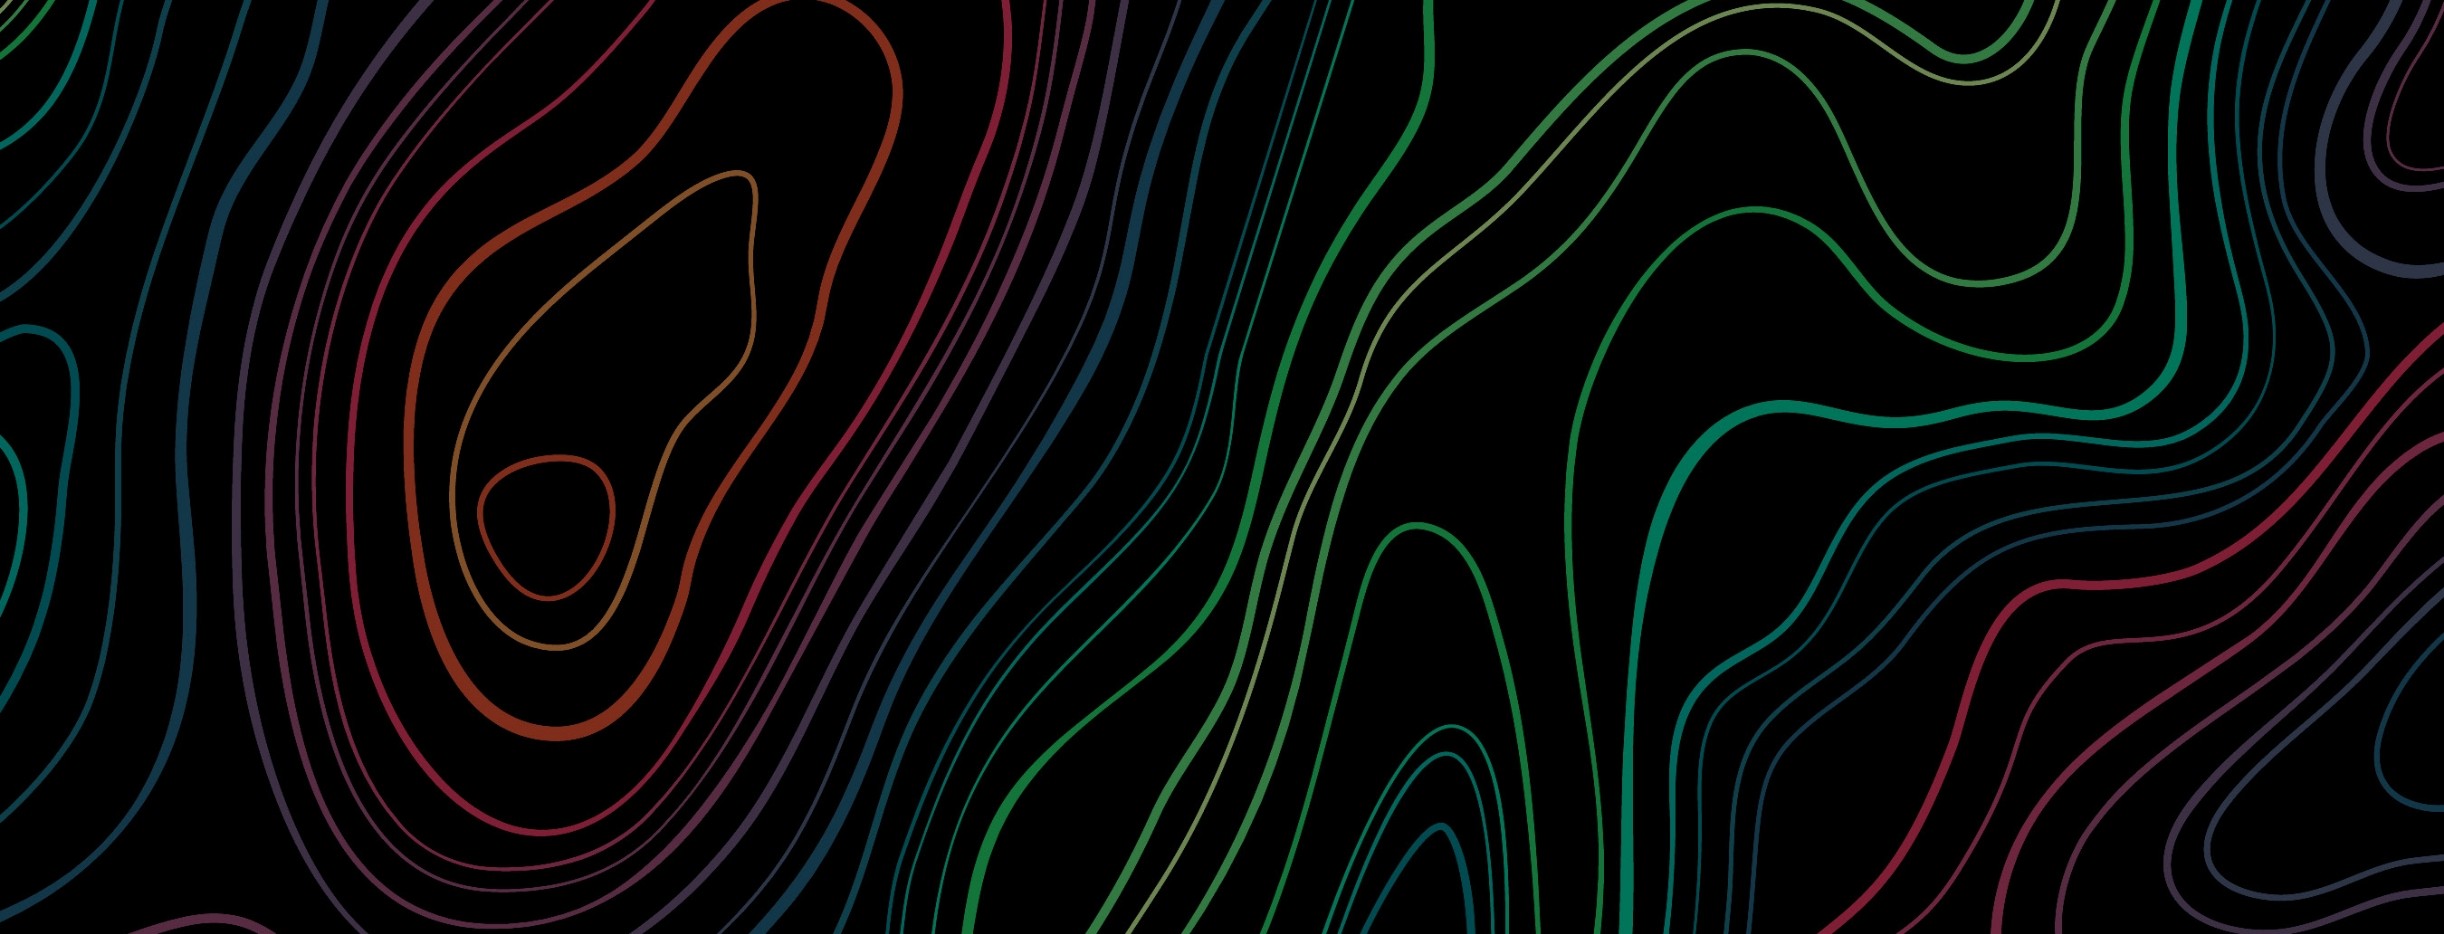 Abstract patterns of heat movement, similar to contour lines, on a black background